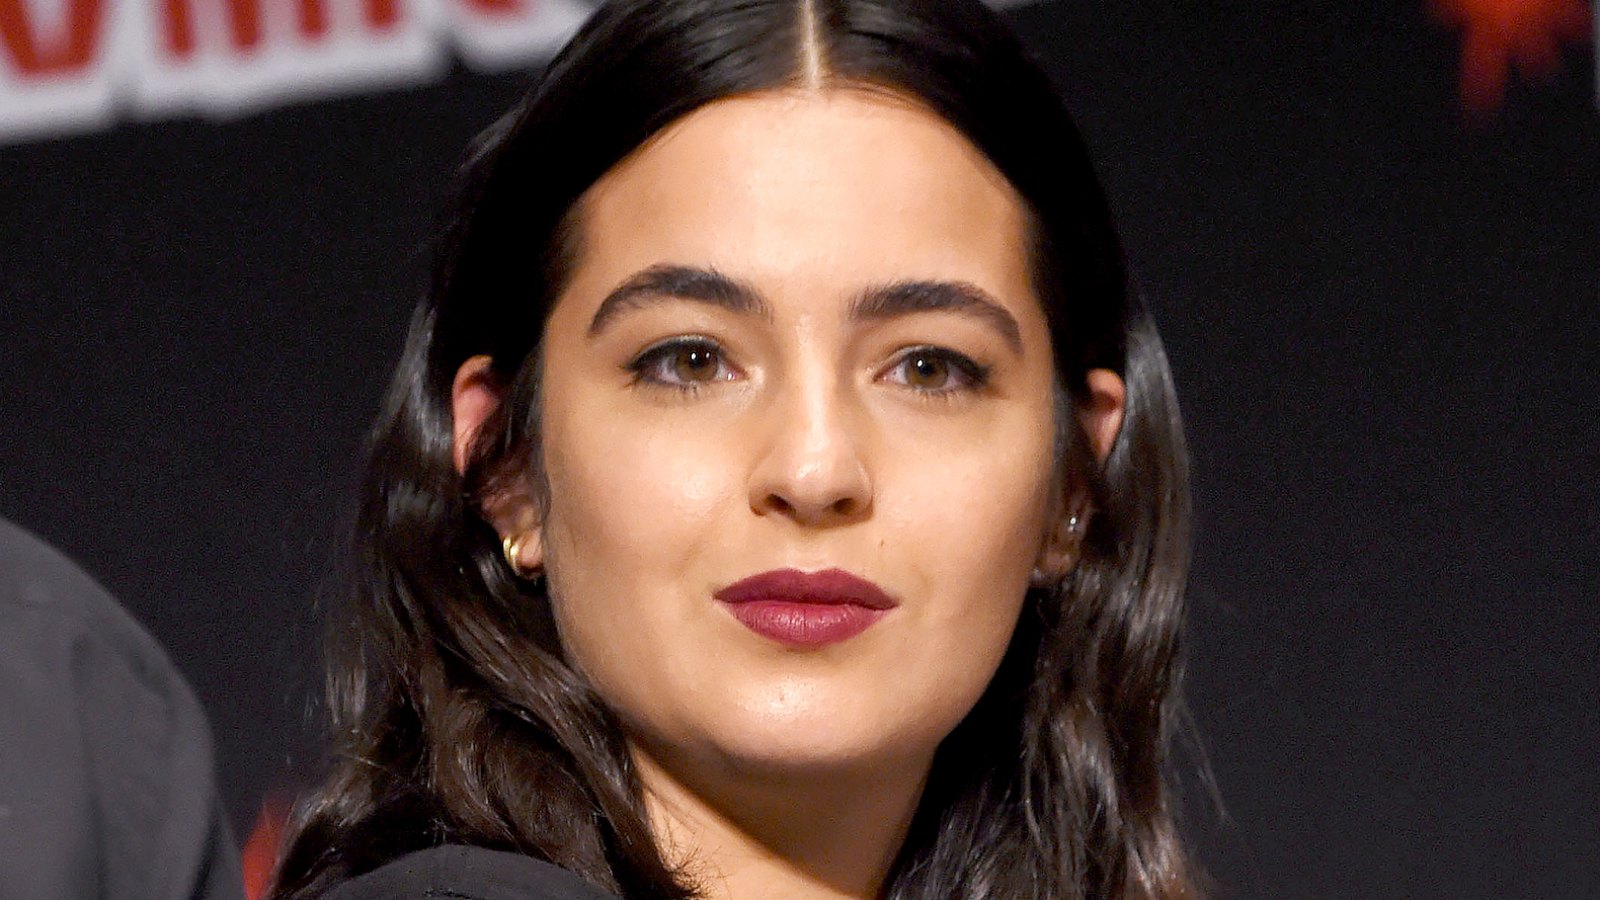 Alanna Masterson speaks onstage AMC presents "The Walking Dead" at New York Comic Con at The Theater at Madison Square Garden on October 8, 2016 in New York City.